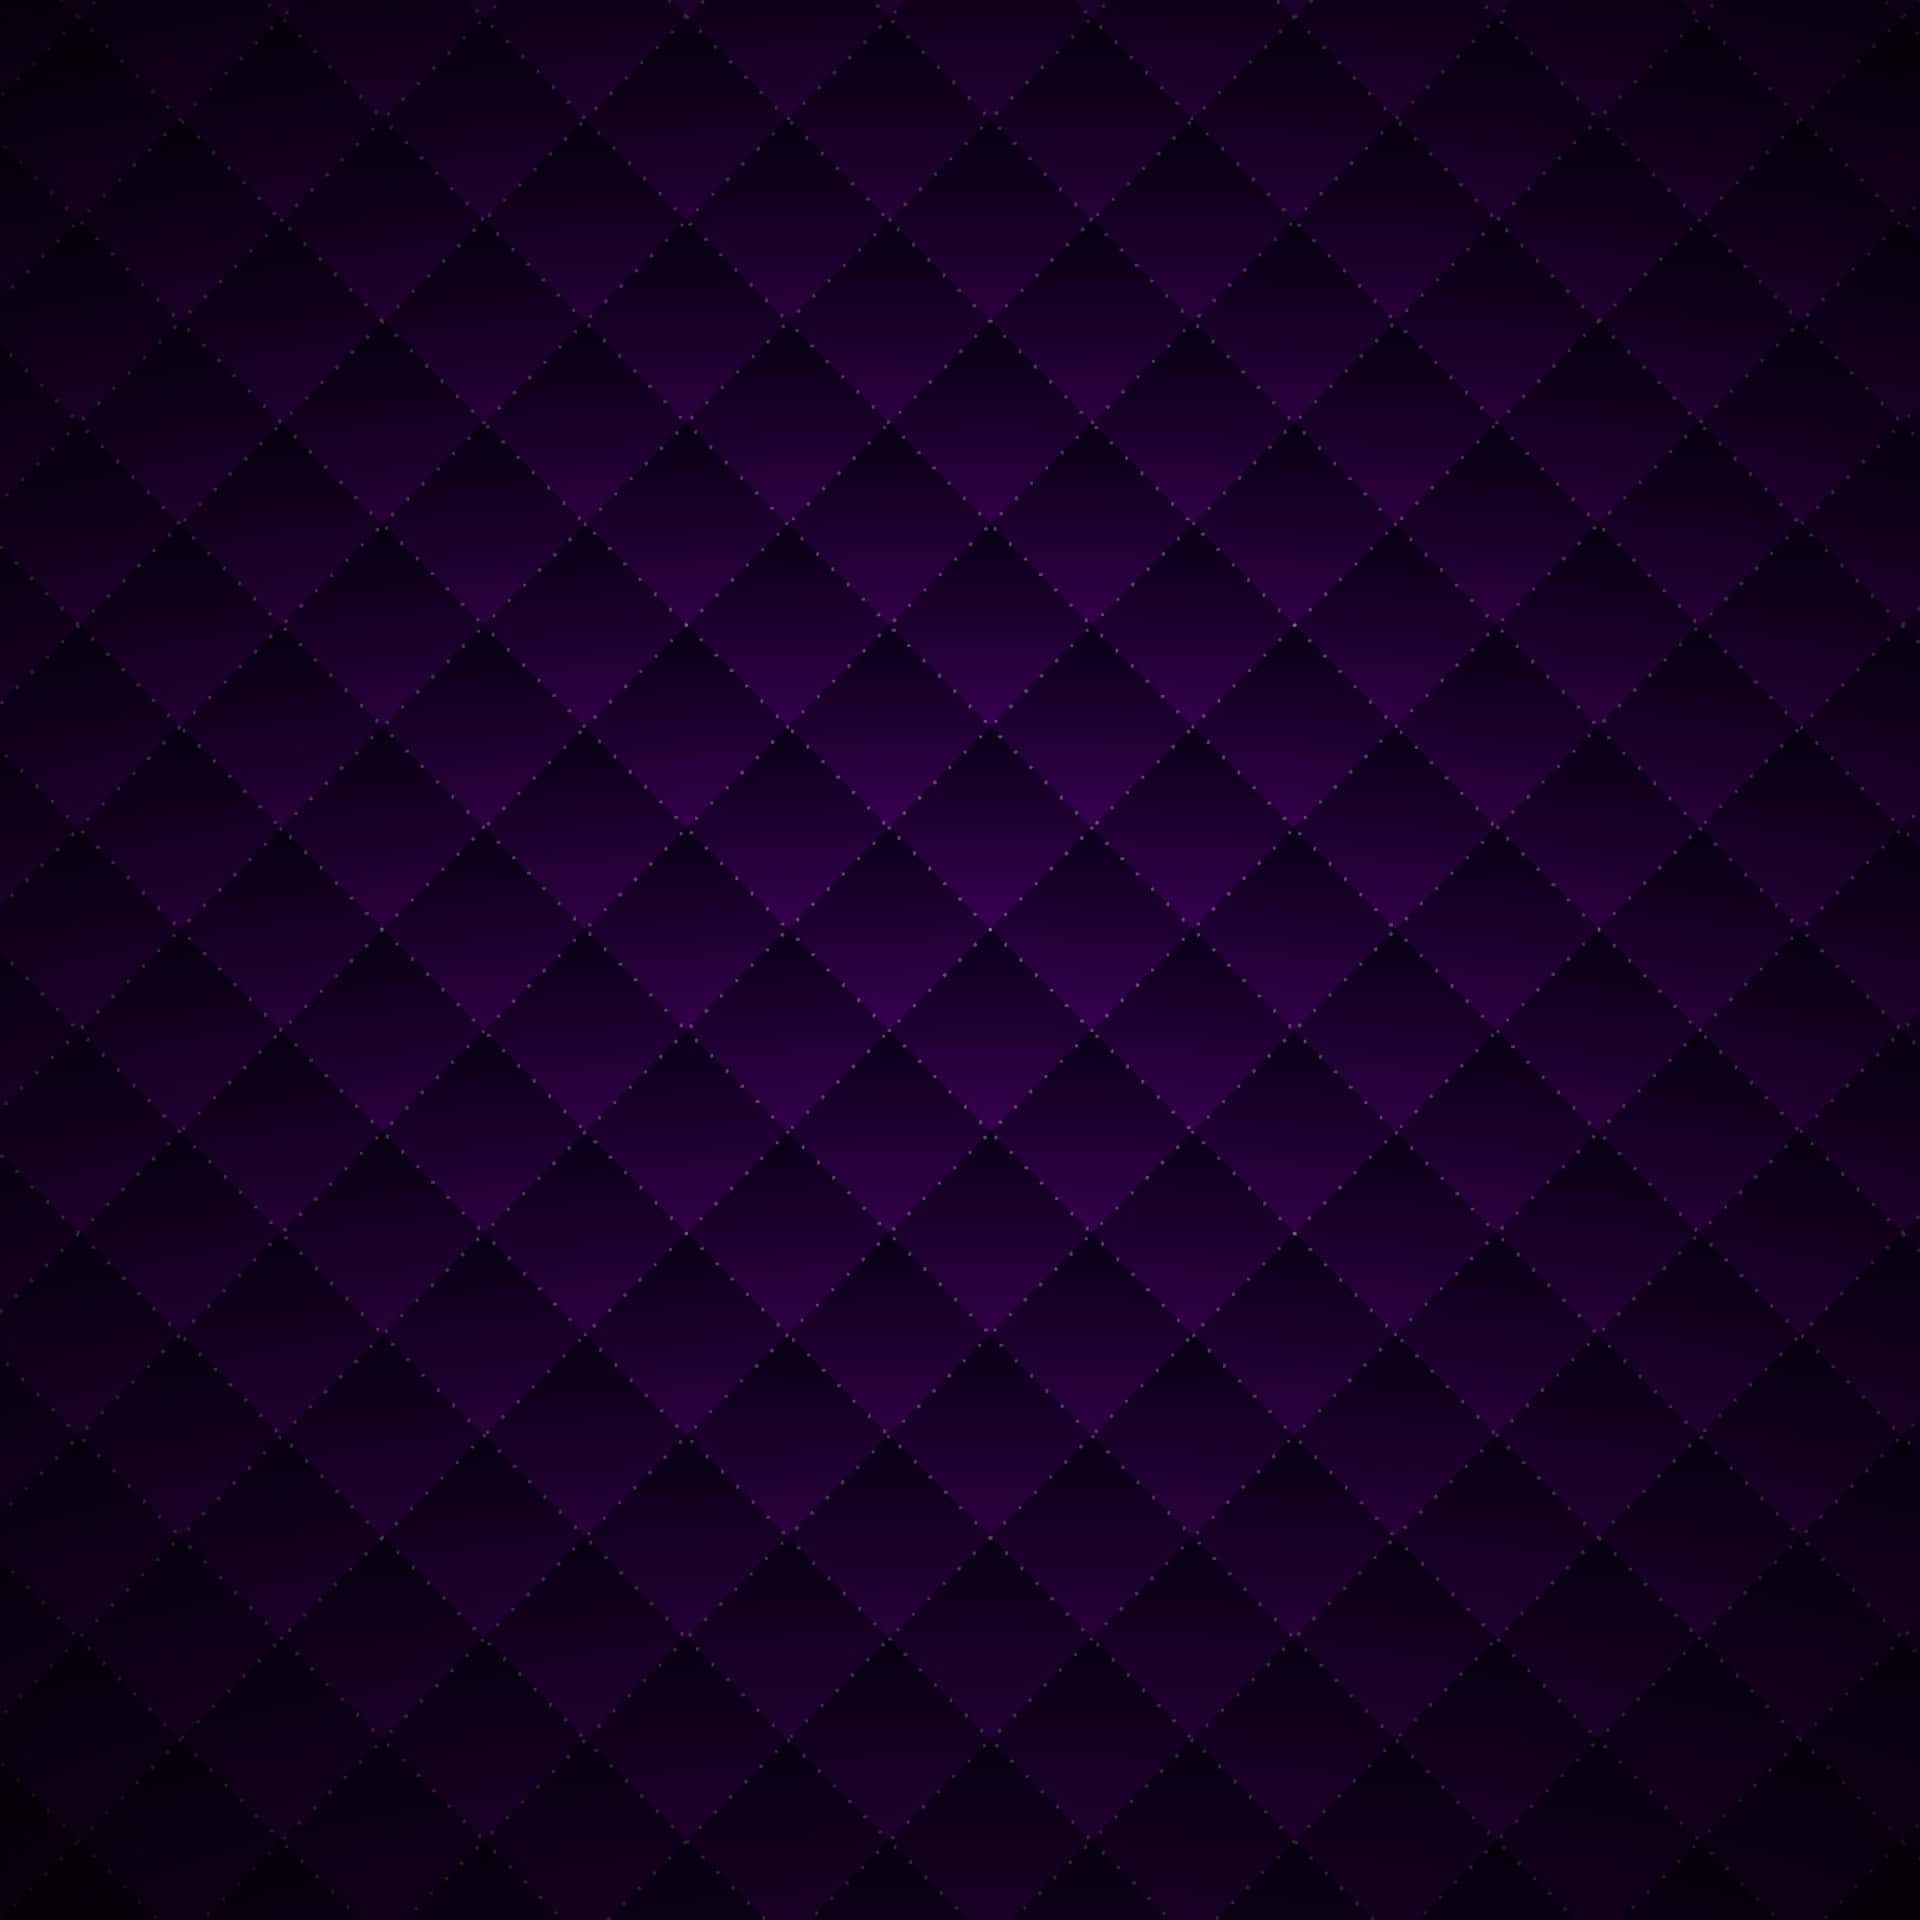 A luxurious purple texture background